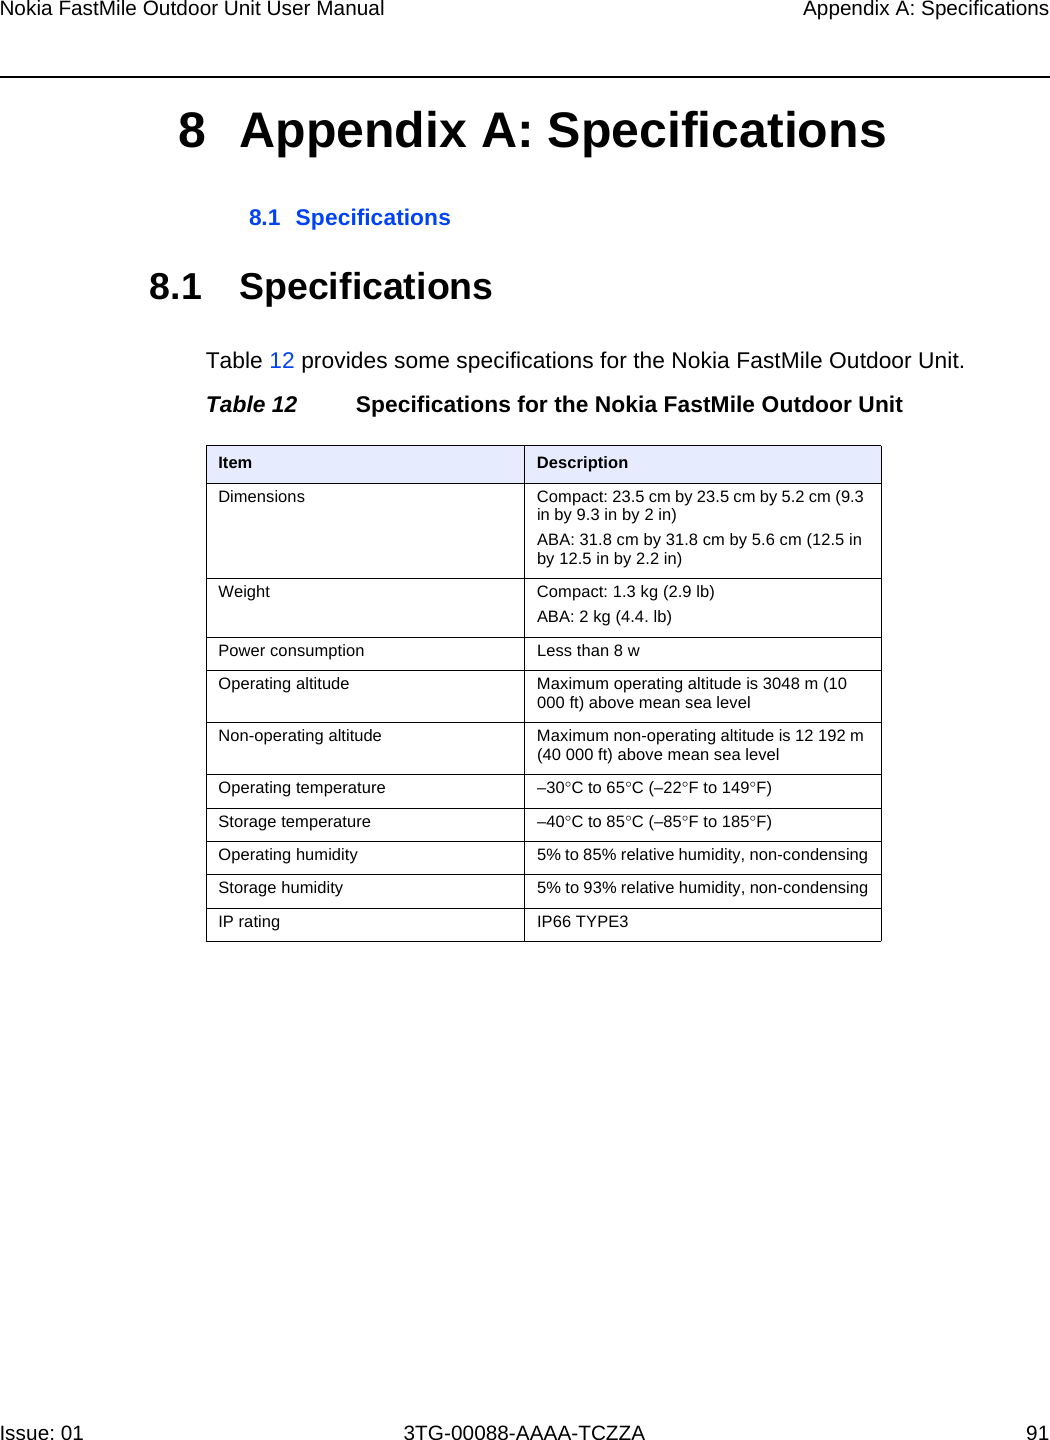 Nokia FastMile Outdoor Unit User Manual Appendix A: SpecificationsIssue: 01 3TG-00088-AAAA-TCZZA 918 Appendix A: Specifications8.1 Specifications8.1 SpecificationsTable 12 provides some specifications for the Nokia FastMile Outdoor Unit.Table 12 Specifications for the Nokia FastMile Outdoor UnitItem DescriptionDimensions Compact: 23.5 cm by 23.5 cm by 5.2 cm (9.3 in by 9.3 in by 2 in)ABA: 31.8 cm by 31.8 cm by 5.6 cm (12.5 in by 12.5 in by 2.2 in)Weight Compact: 1.3 kg (2.9 lb)ABA: 2 kg (4.4. lb)Power consumption Less than 8 wOperating altitude  Maximum operating altitude is 3048 m (10 000 ft) above mean sea levelNon-operating altitude  Maximum non-operating altitude is 12 192 m (40 000 ft) above mean sea levelOperating temperature –30°C to 65°C (–22°F to 149°F)Storage temperature –40°C to 85°C (–85°F to 185°F)Operating humidity  5% to 85% relative humidity, non-condensingStorage humidity  5% to 93% relative humidity, non-condensingIP rating IP66 TYPE3